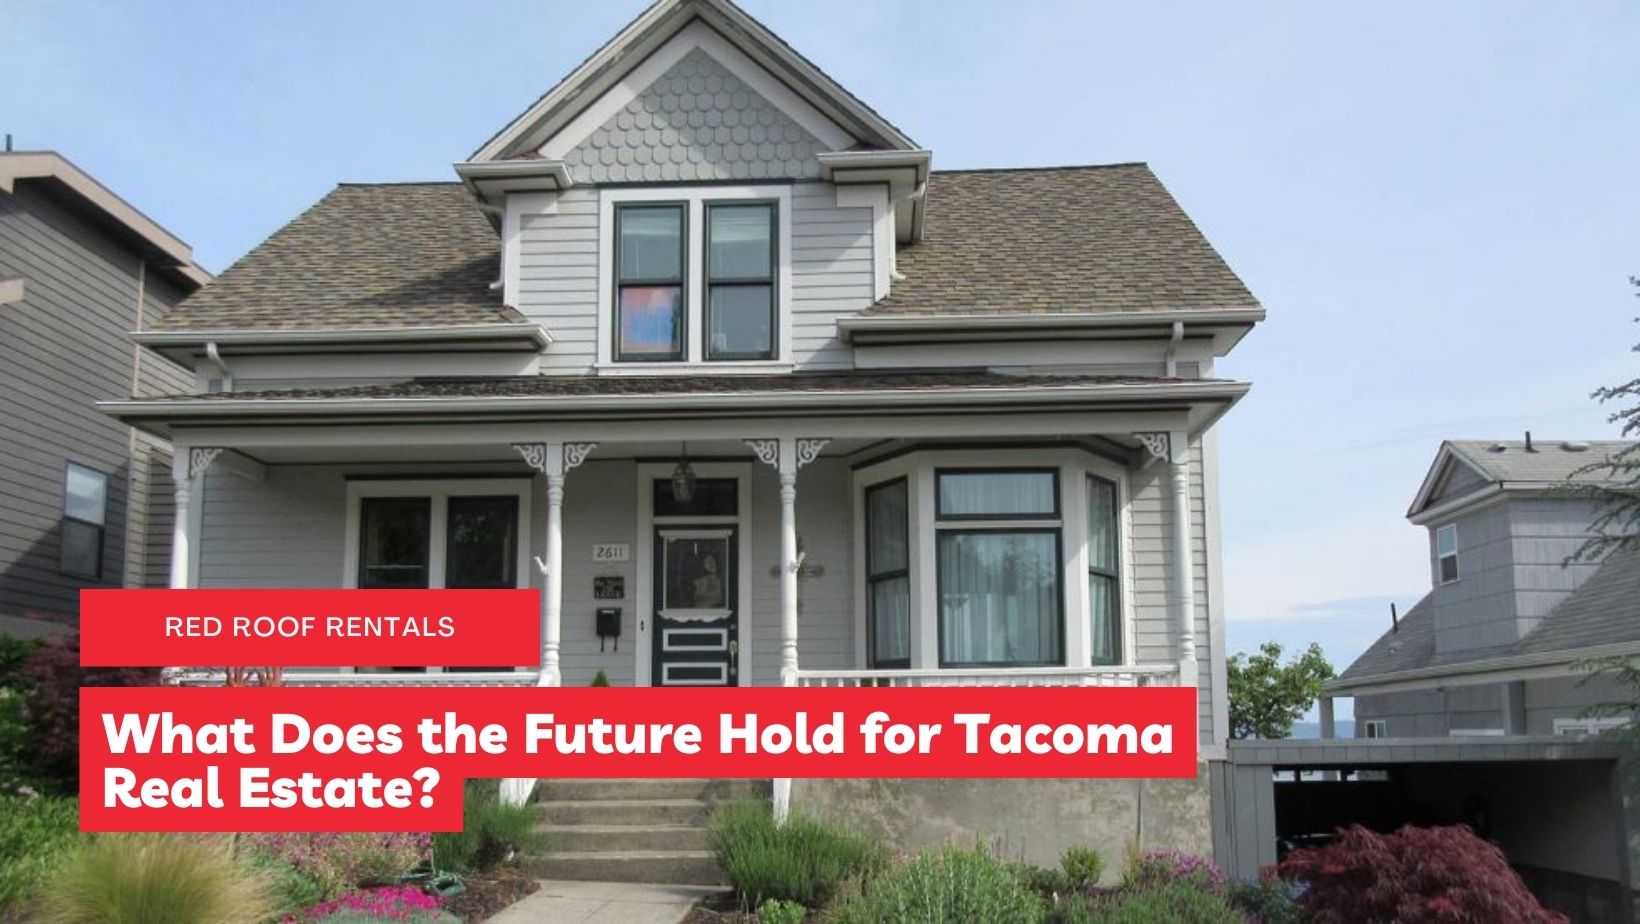 What Does the Future Hold for Tacoma Real Estate?